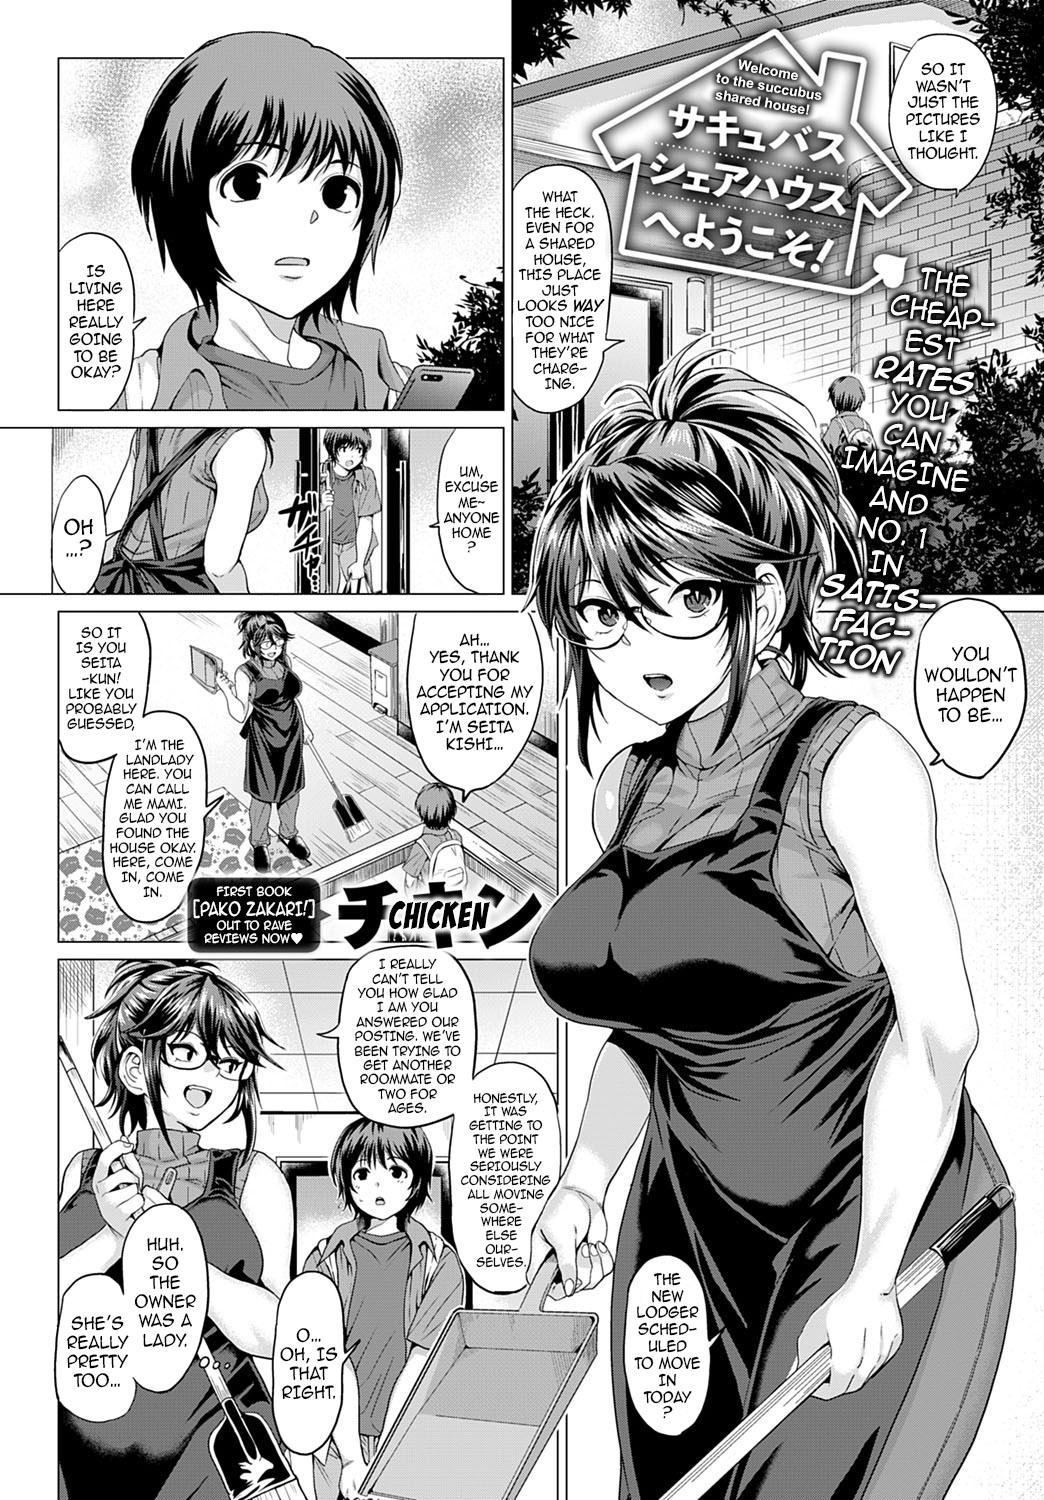 Succubus Share House e Youkoso! | Welcome to the Succubus Shared House! 0